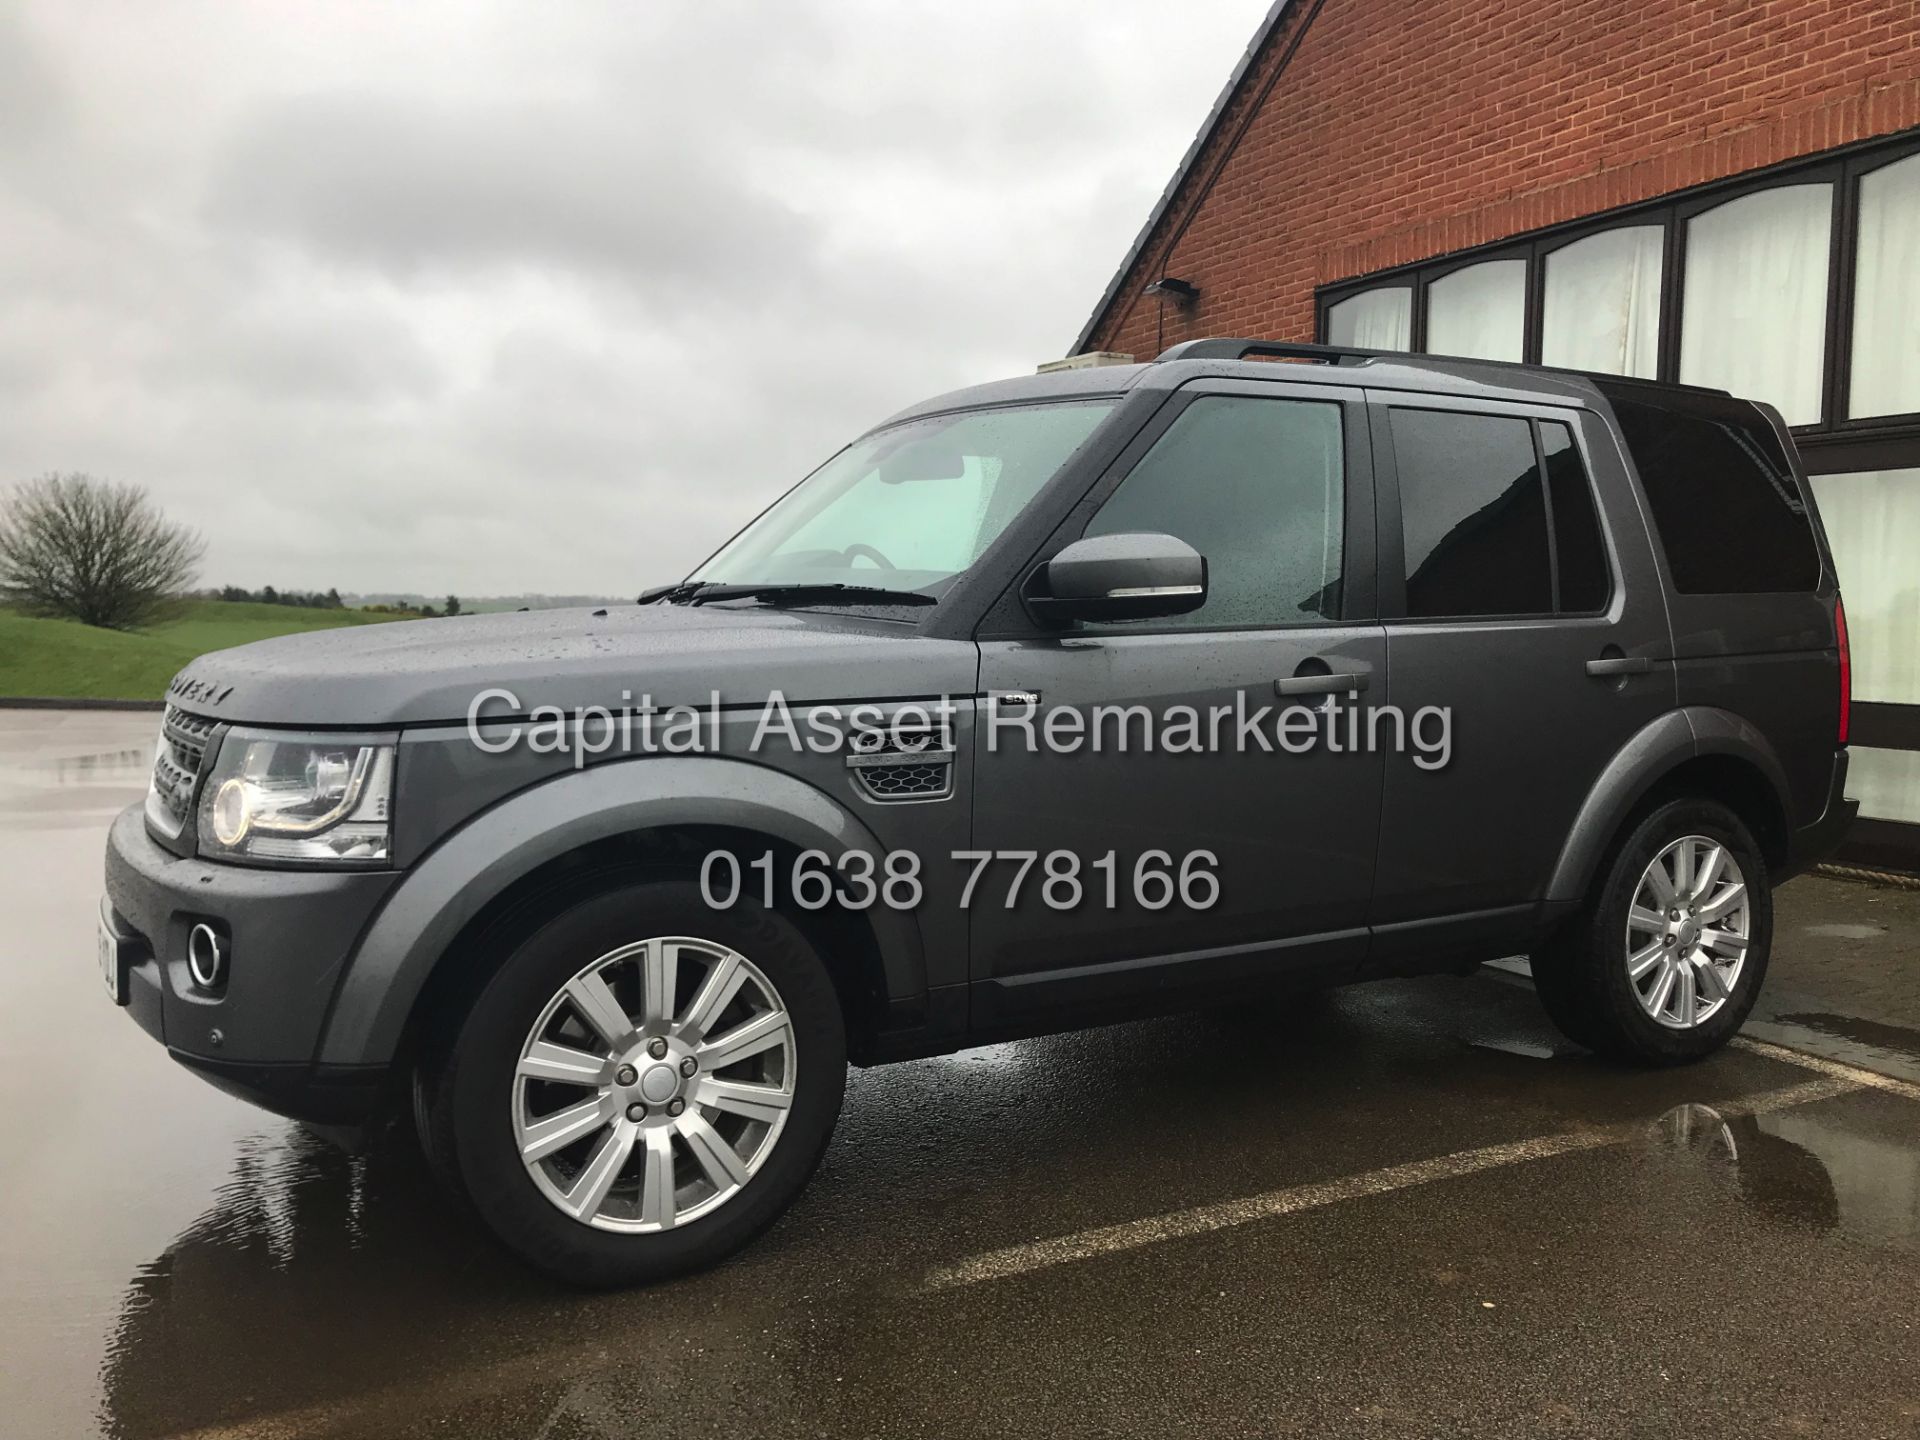 LANDROVER DISCOVERY 4 "SE" AUTO 3.0SDV6 - (2016 REG) 1 KEEPER - SAT NAV - LEATHER - HUGE SPEC -WOW! - Image 4 of 20